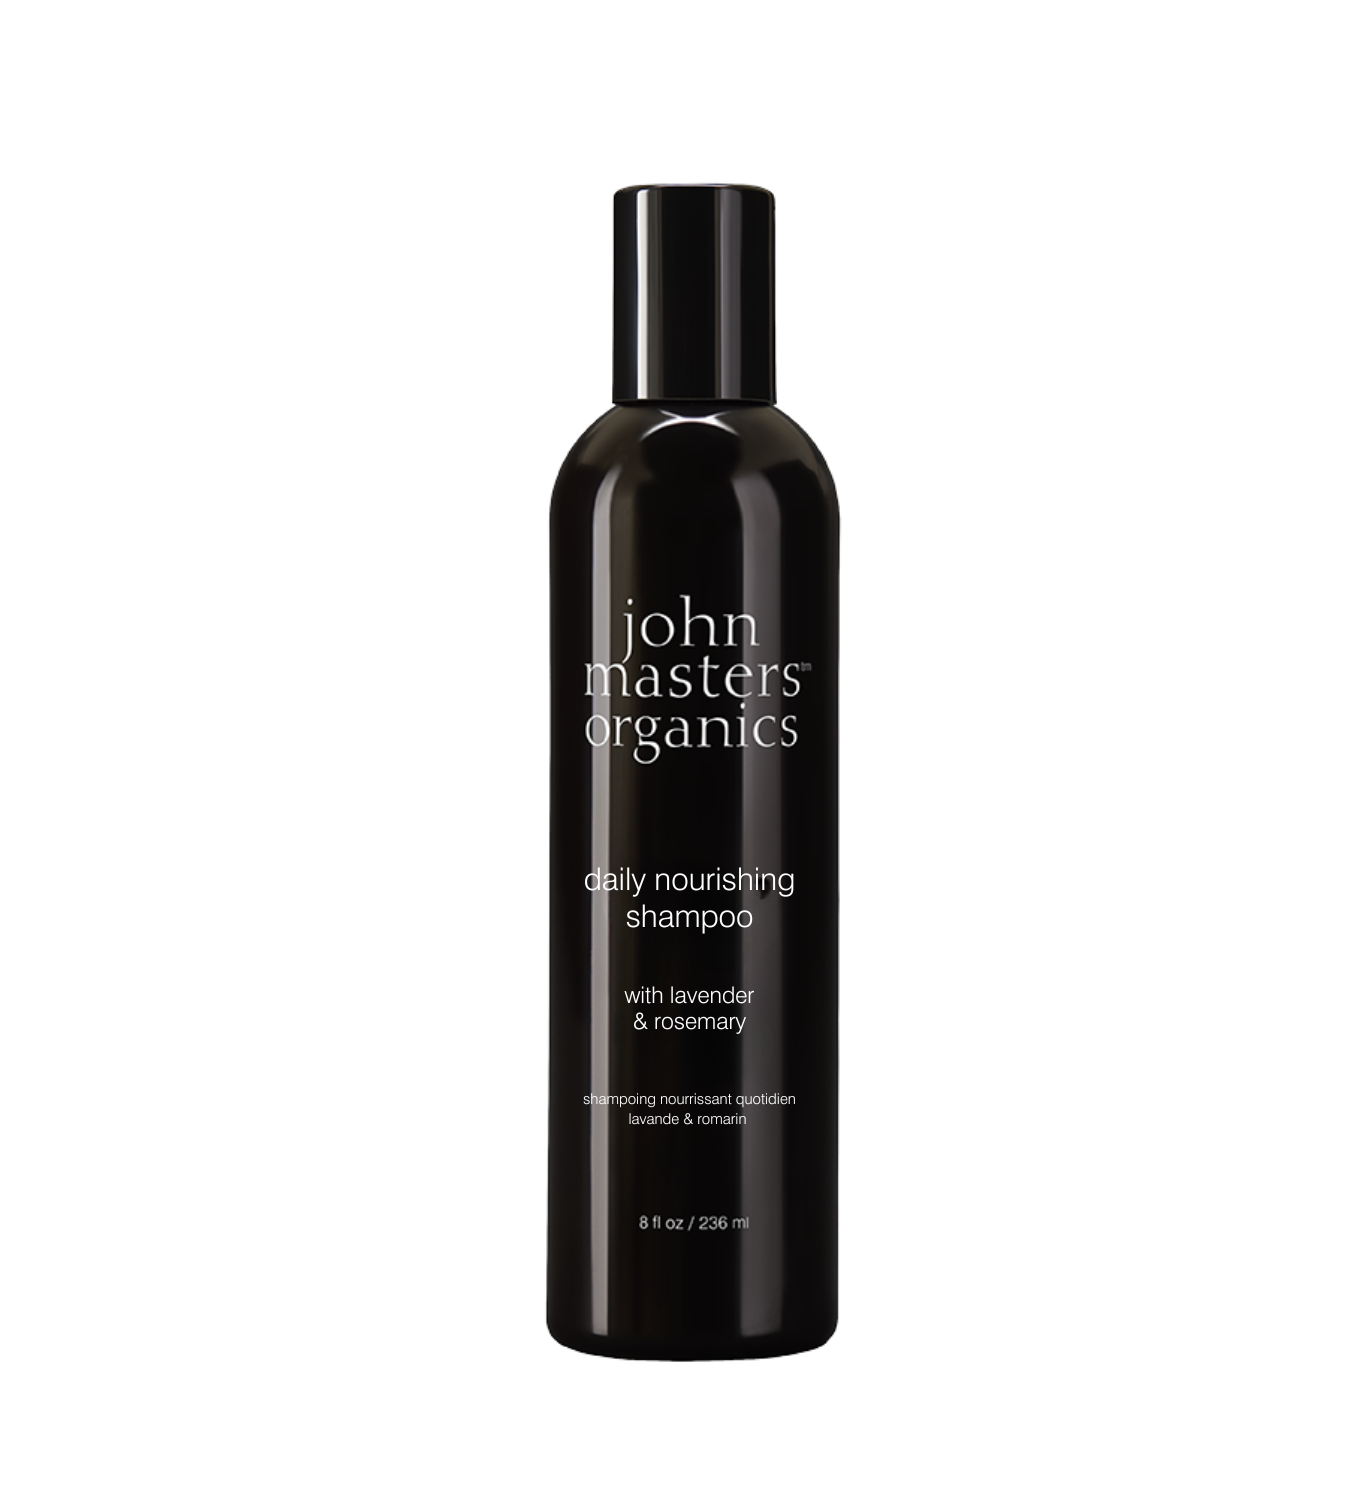 Shampoo for Normal Hair with Lavender & Rosemary: 8 fl oz / 236 ml